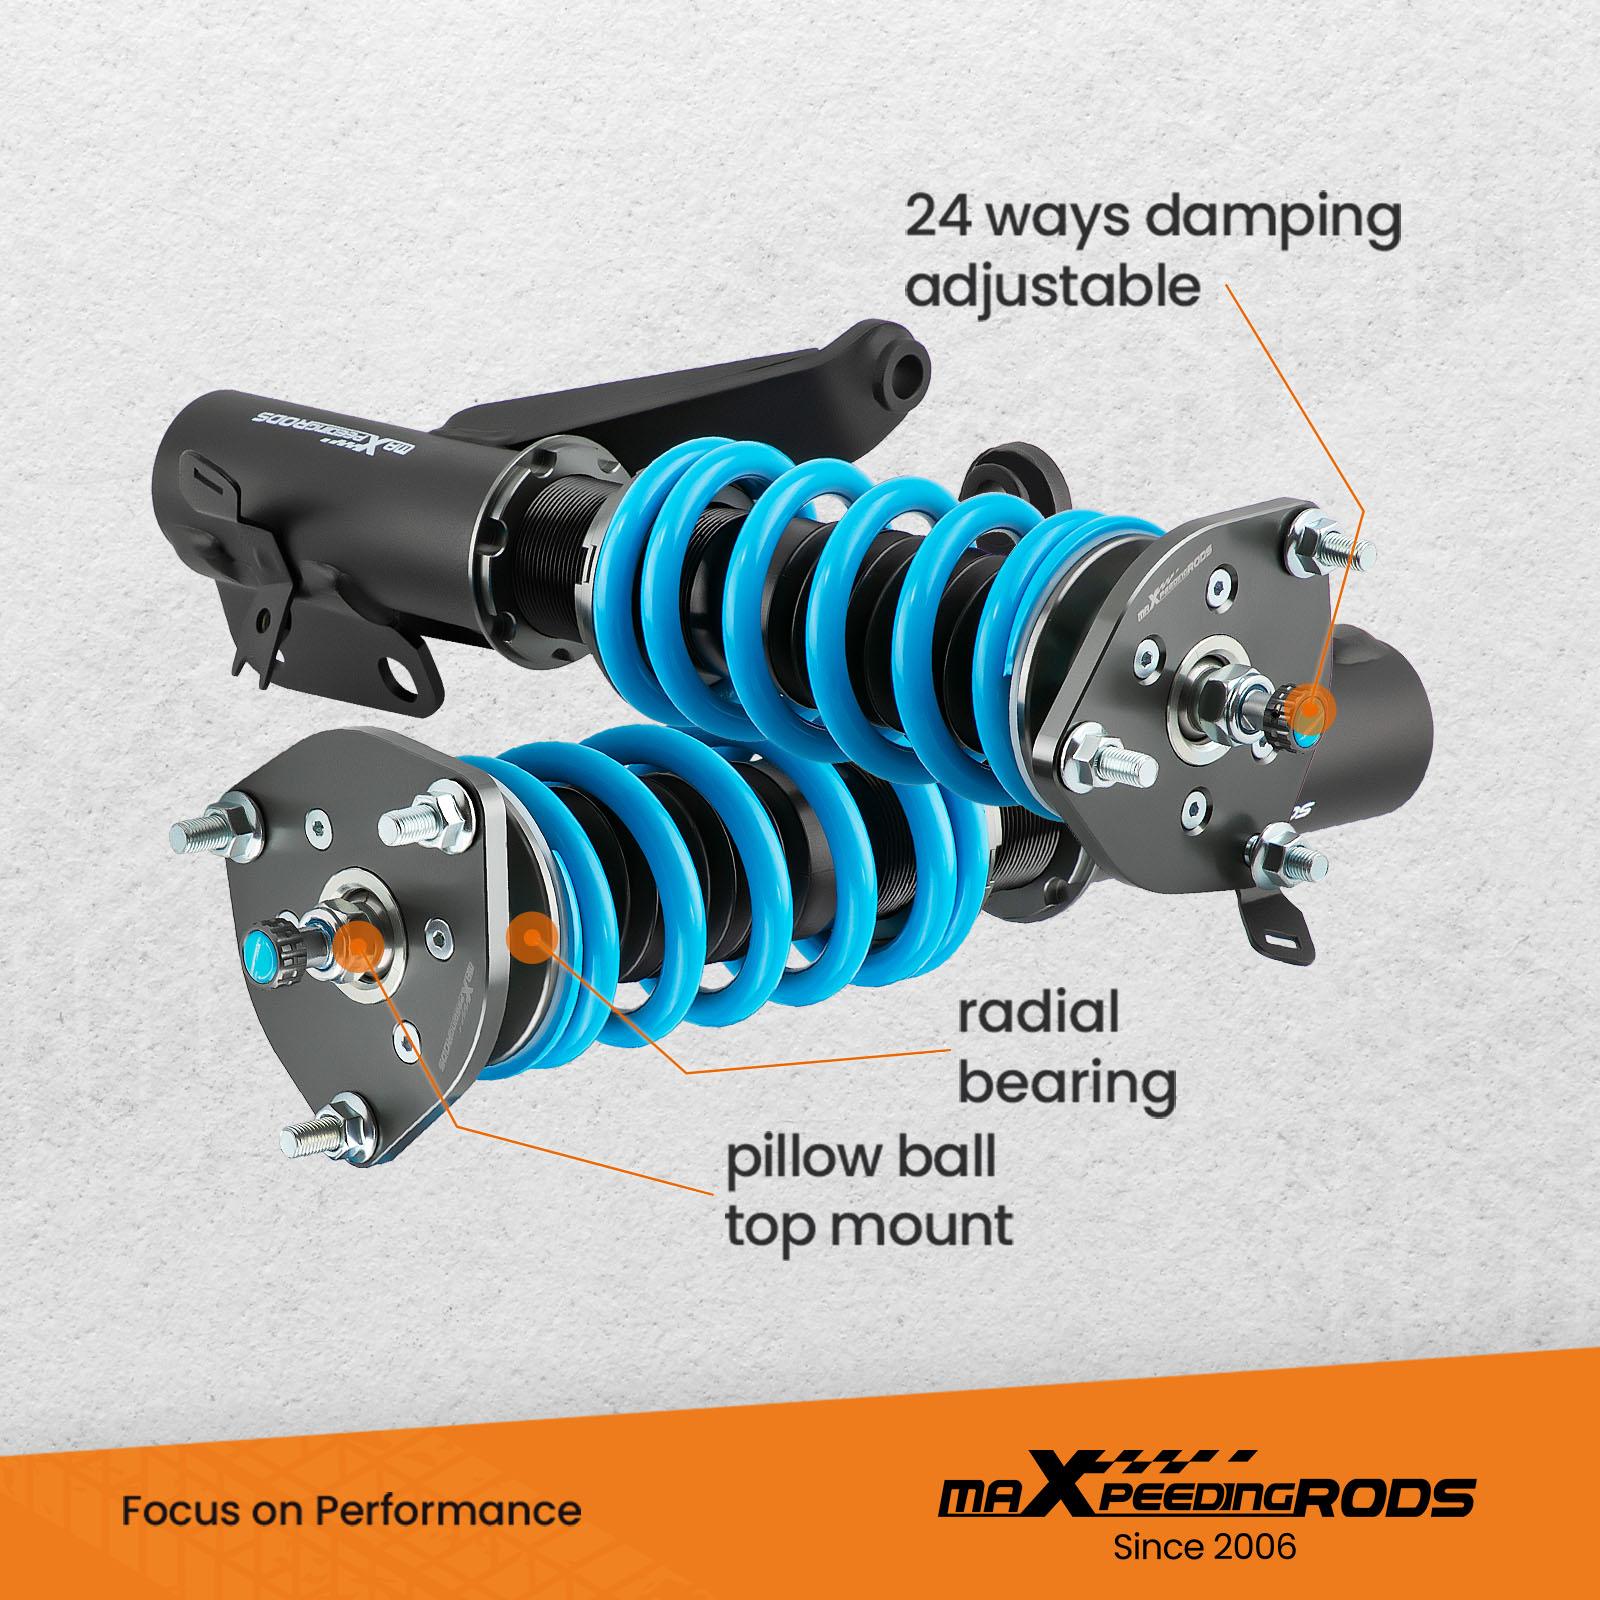 MaXpeedingRods Blog | An Automotive Blog from MaXpeedingRods - Insight into the Numbers of T6 Coilovers